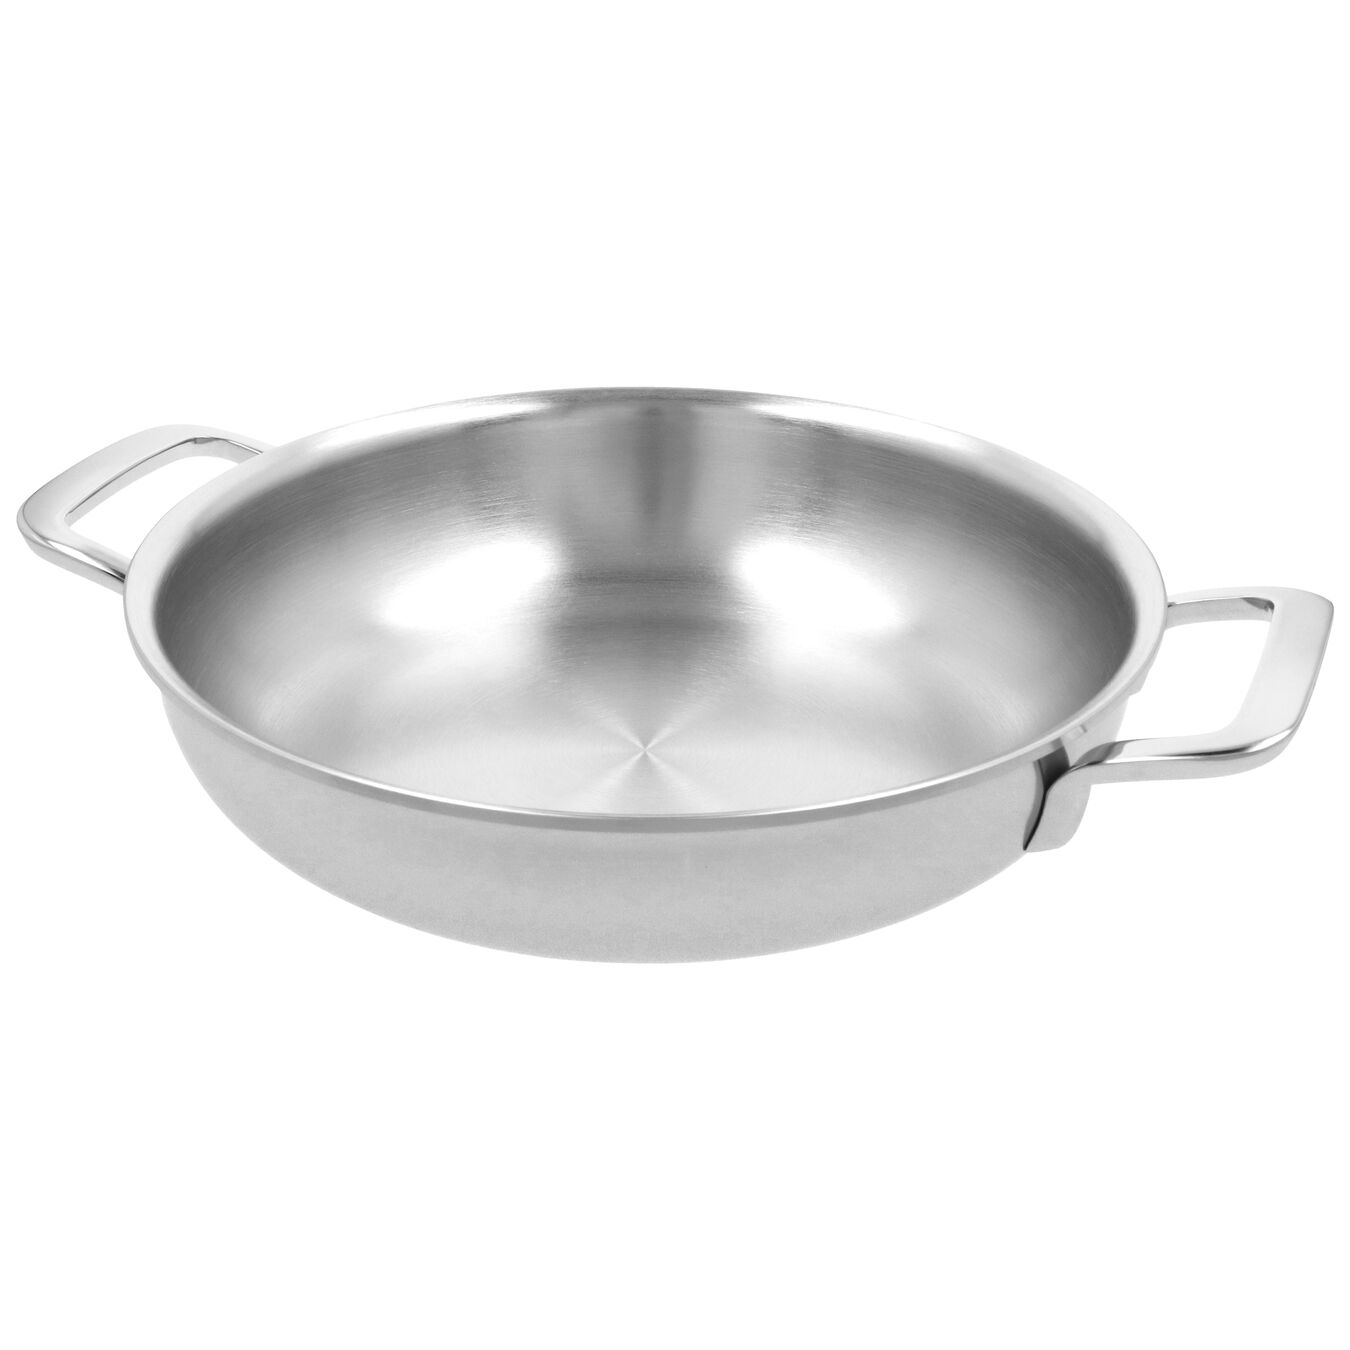 24 cm / 9.5 inch 18/10 Stainless Steel Frying pan with 2 handles,,large 4